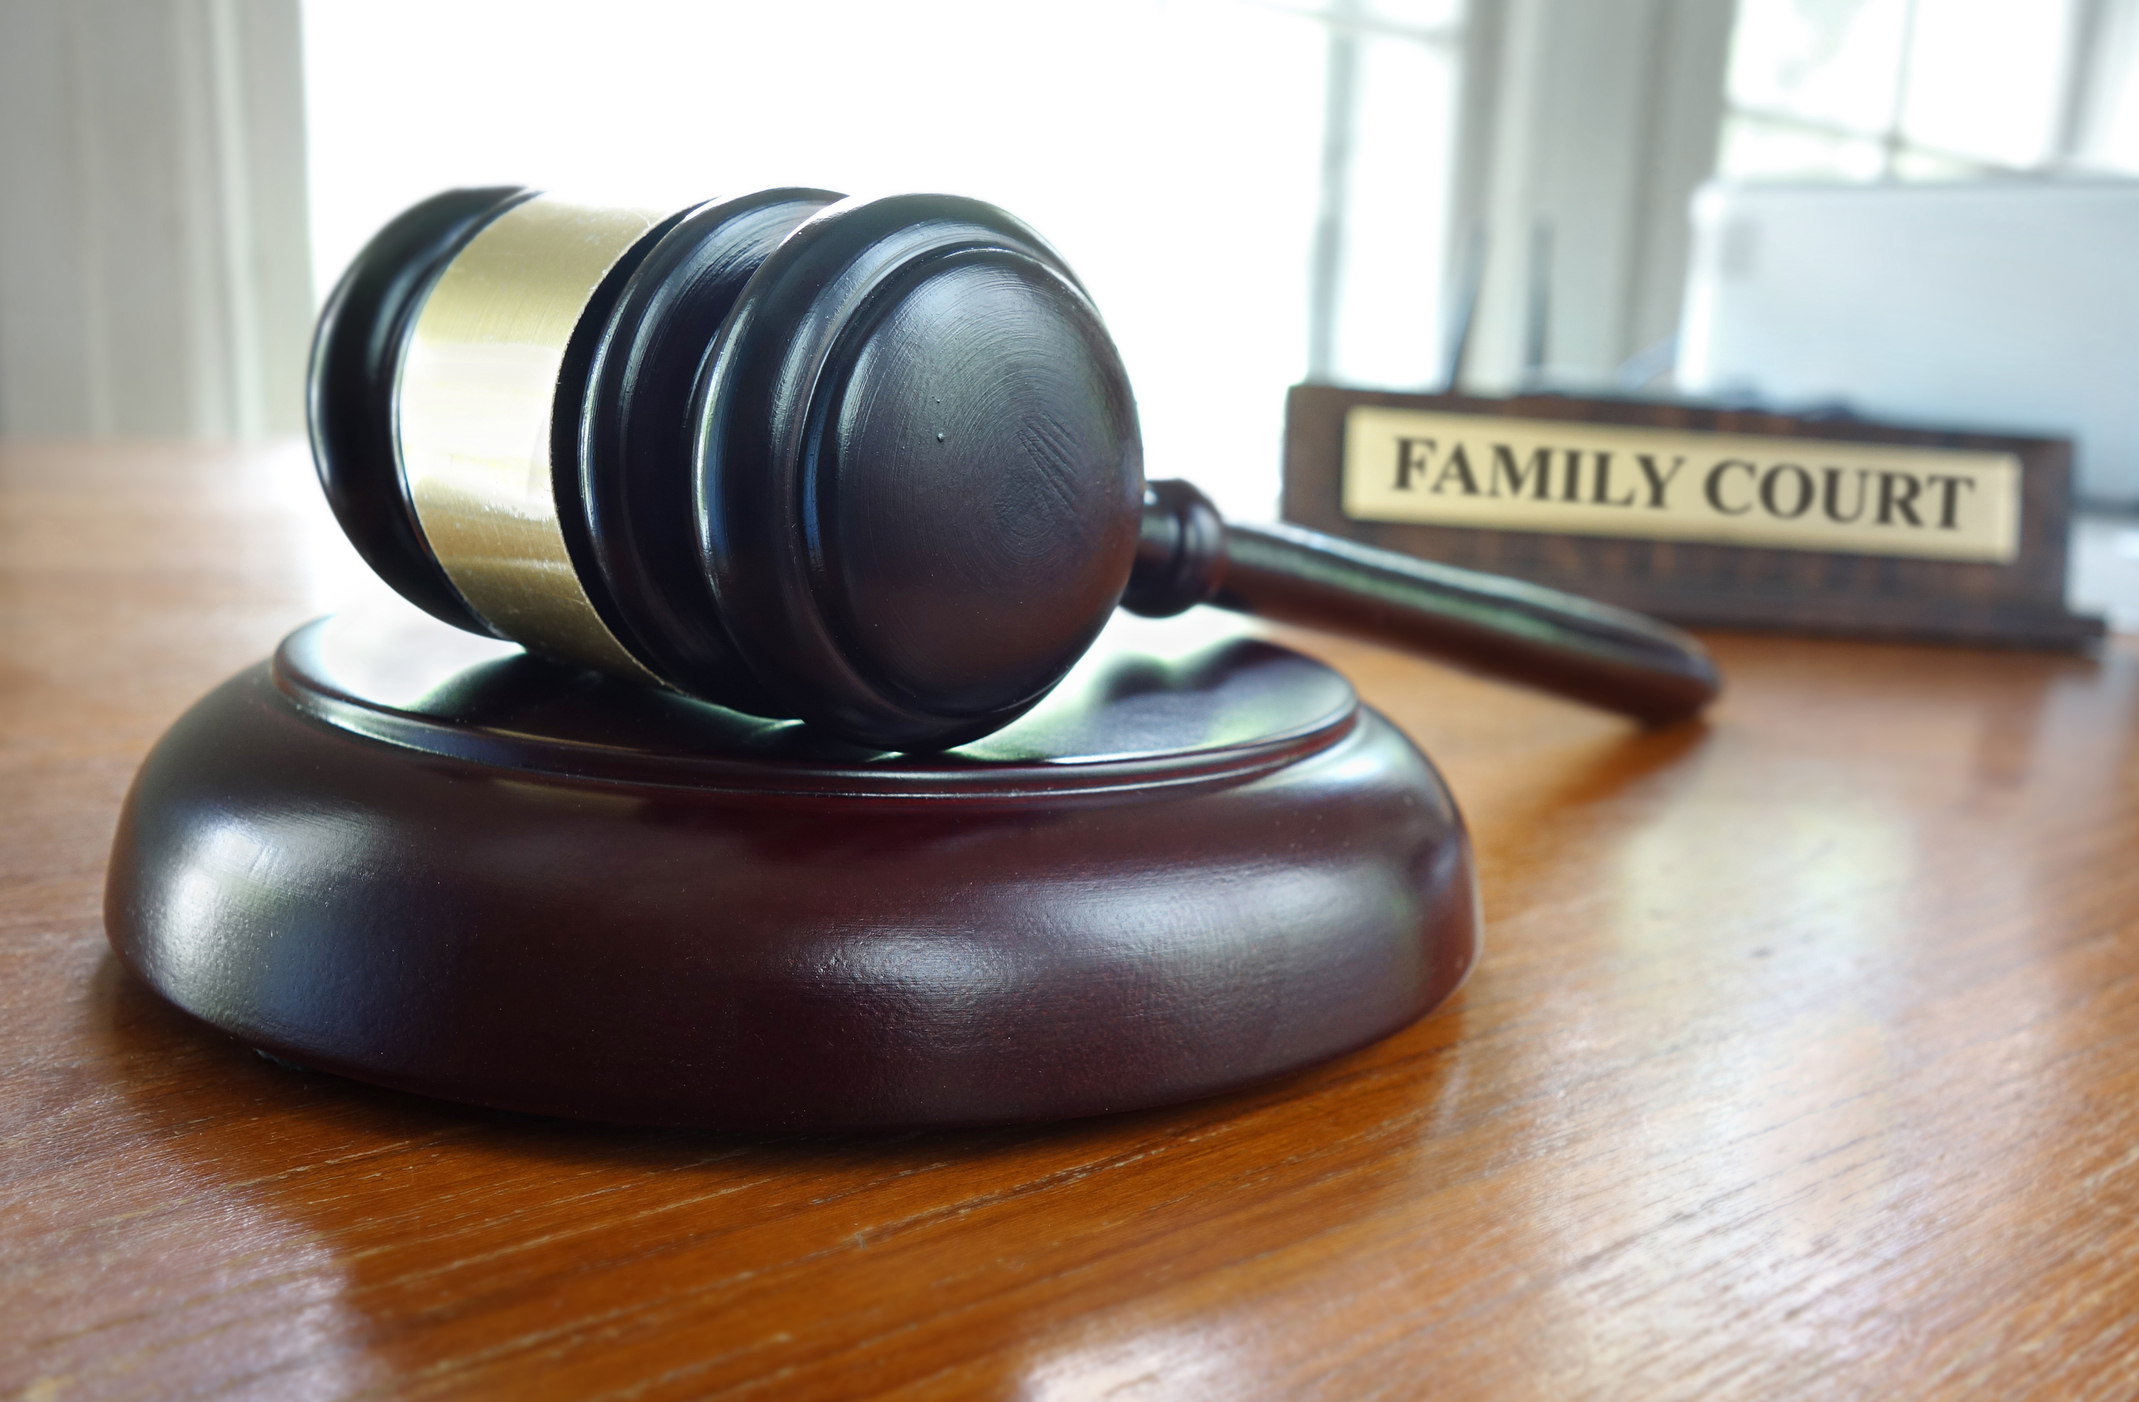 What You Need To Know About Emergency Child Custody Hearings in Orlando, FL